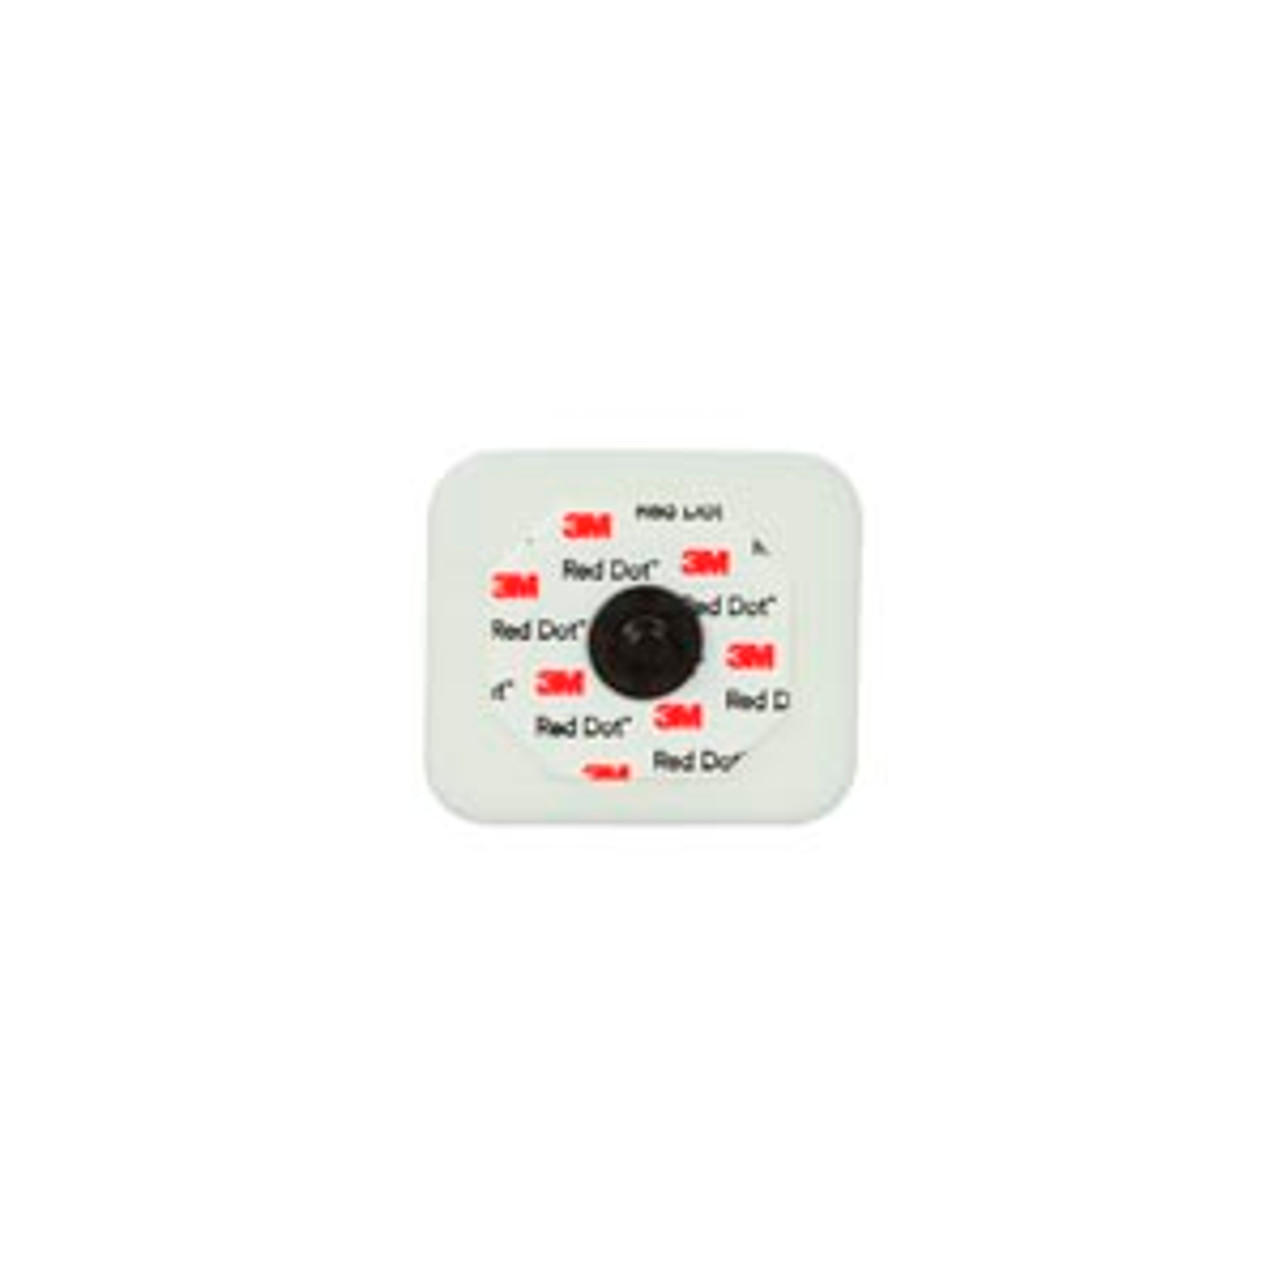 3M RED DOT MONITORING ELECTRODES WITH FOAM TAPE & STICKY GEL, 2570-5